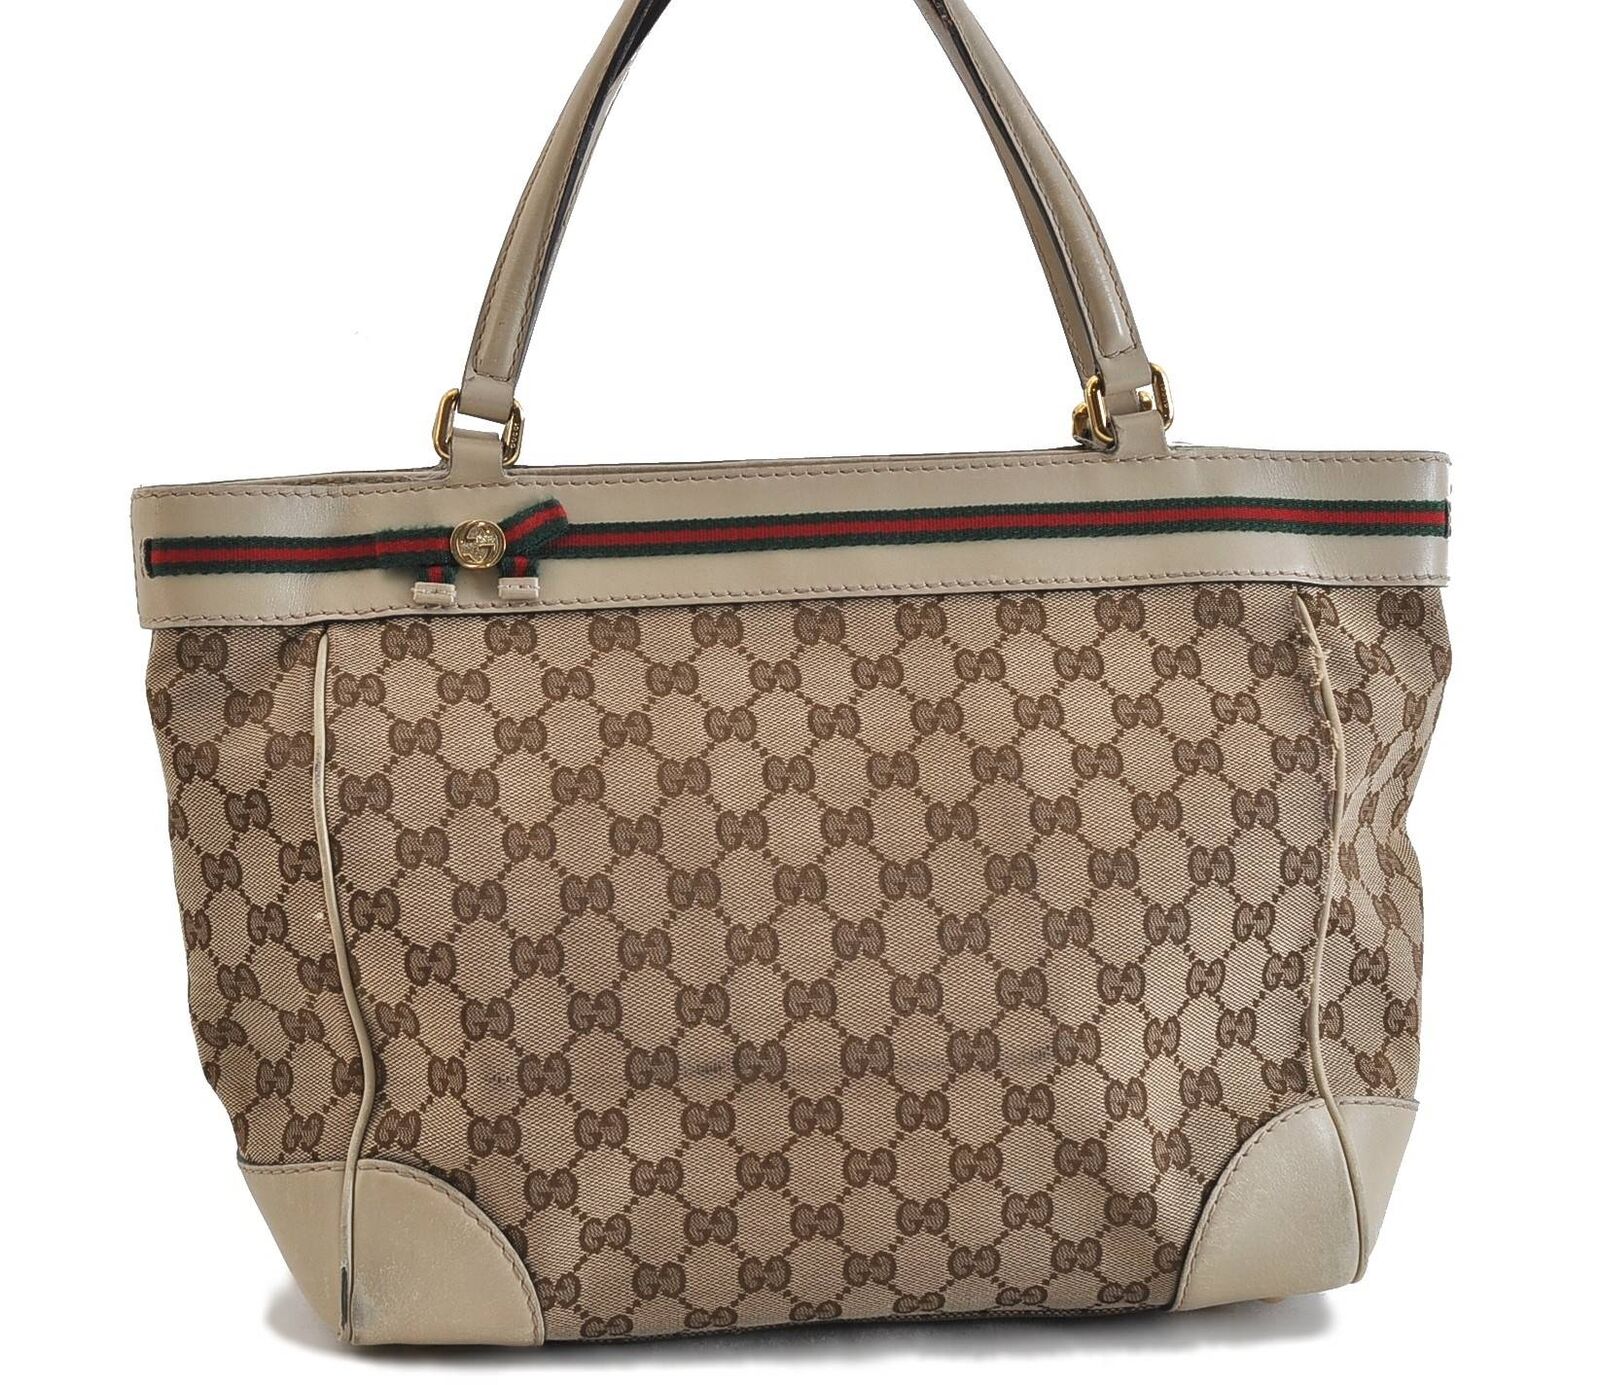 Auth GUCCI Web Sherry Line Mayfair Tote Bag Canvas Leather 257061 Brown 0634C